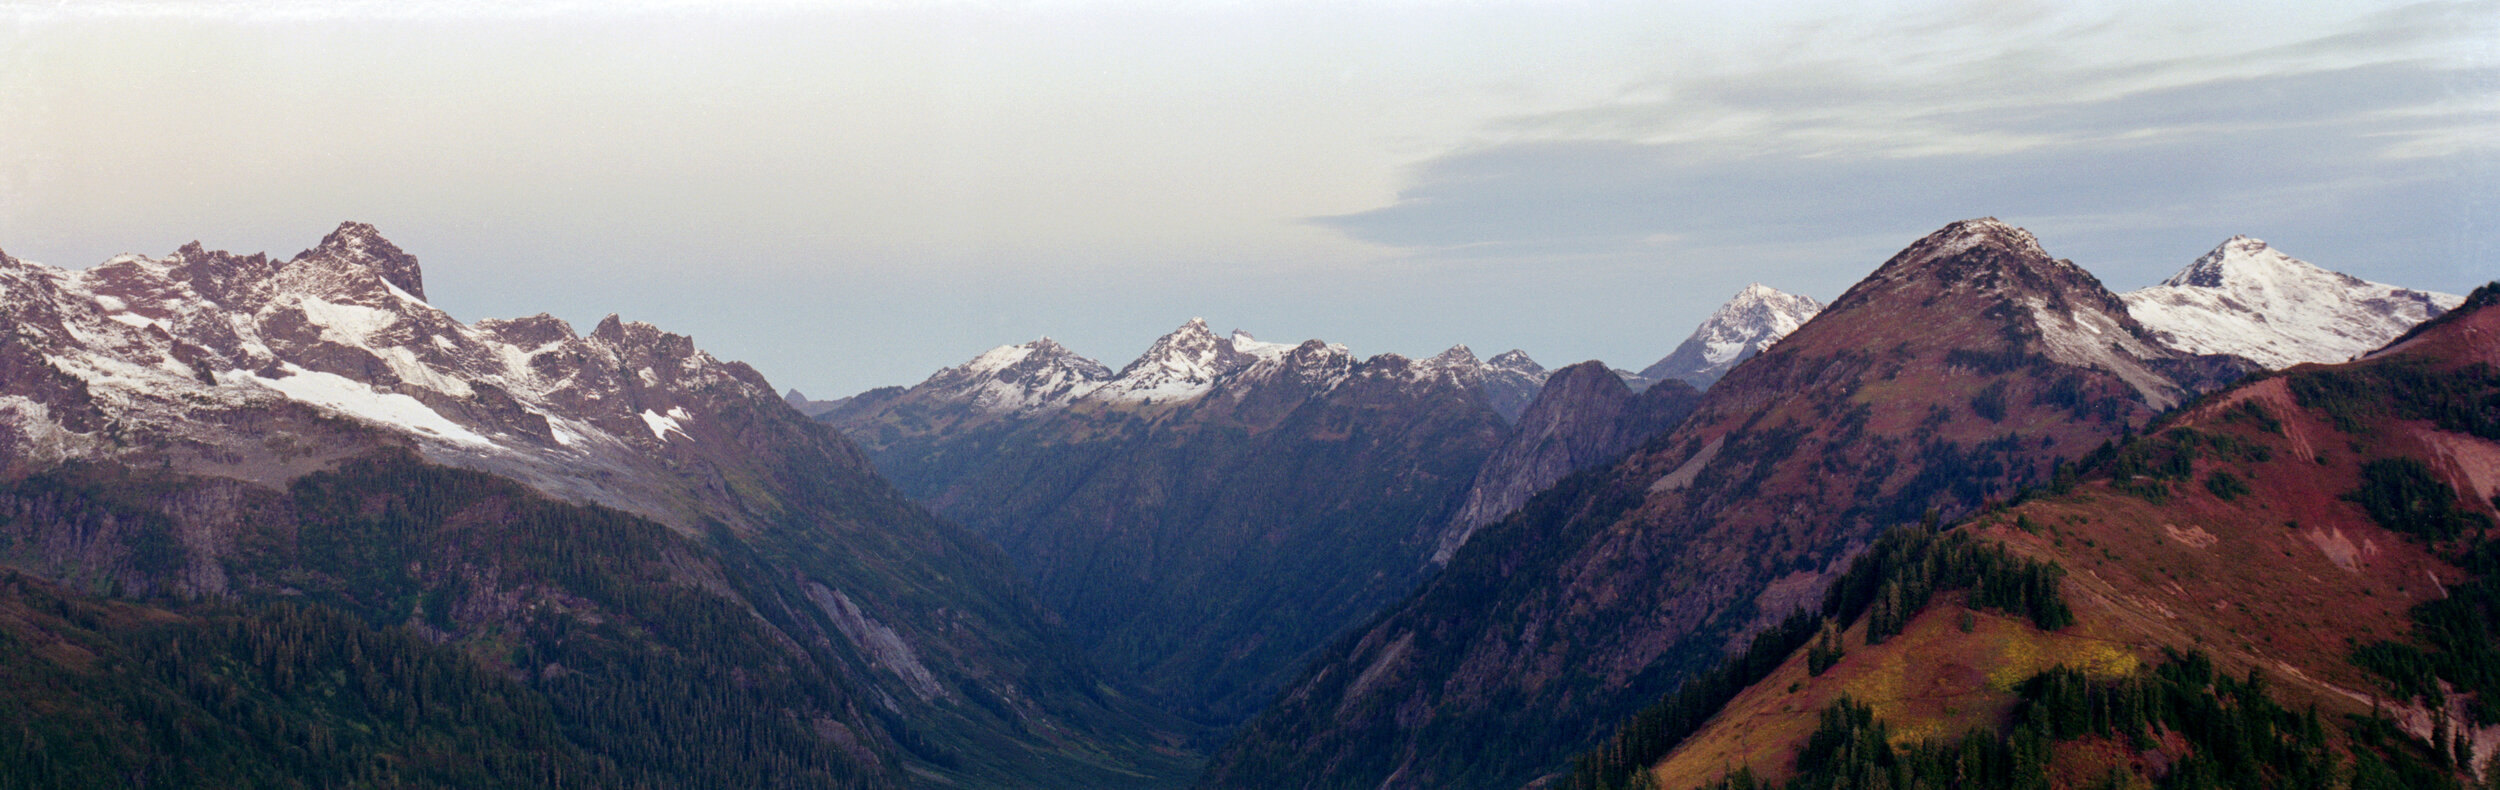  Mount Sefrit, Goat Mountain, and Granite Mountain from the head of the Ruth Creek Valley, above Hannegan Pass. Kodak Gold 200. 